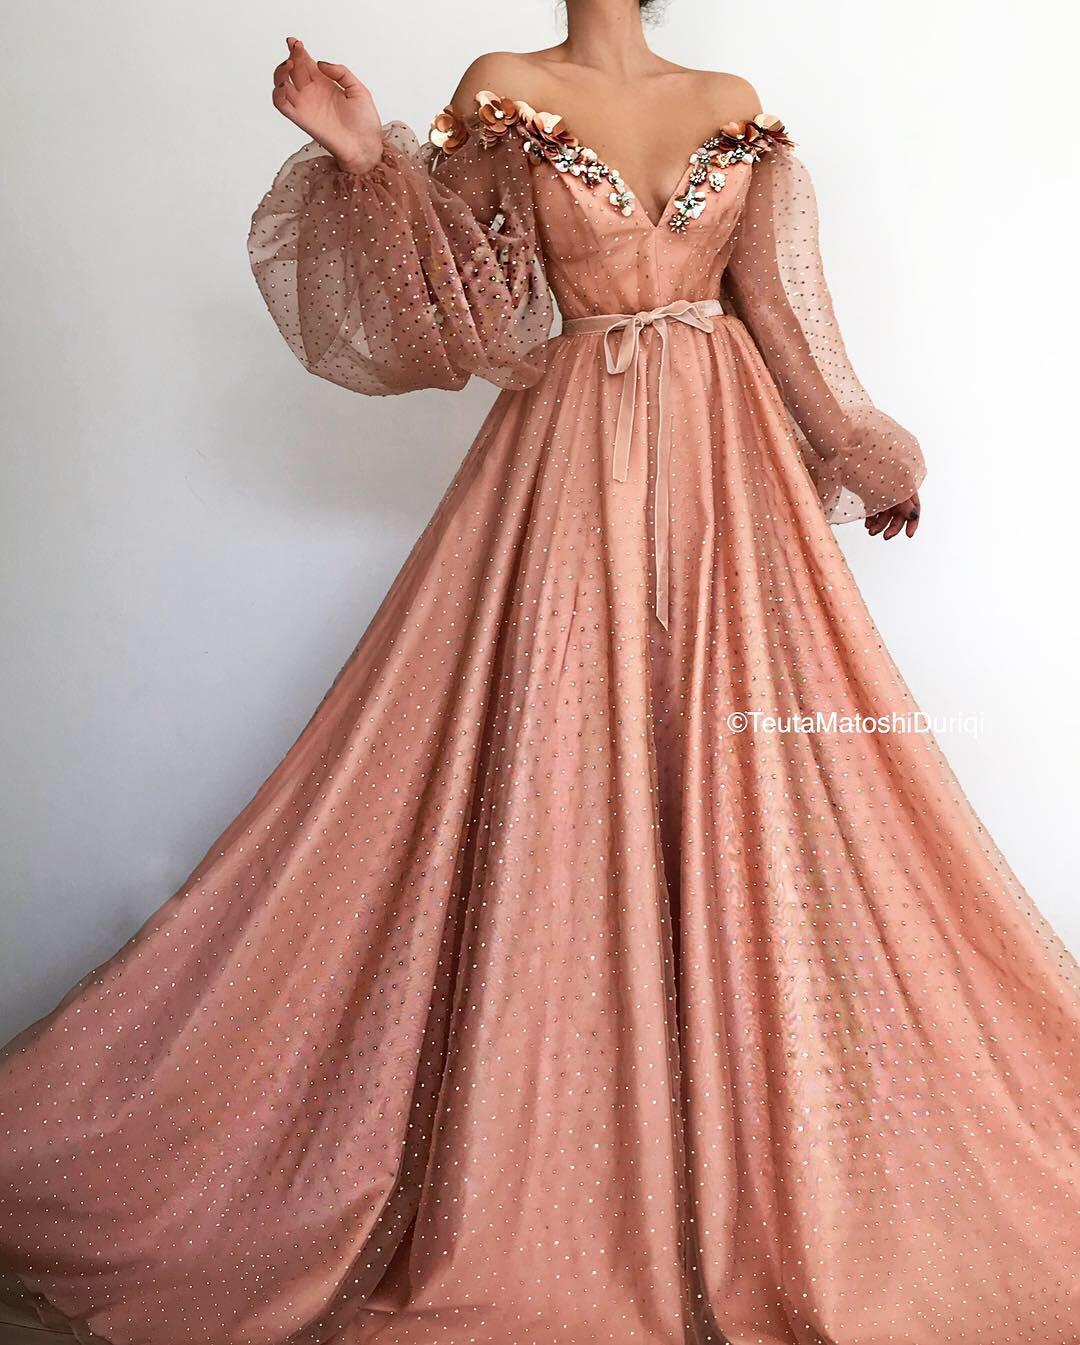 Pink A-Line dress with v-neck, long off the shoulder sleeves and embroidery